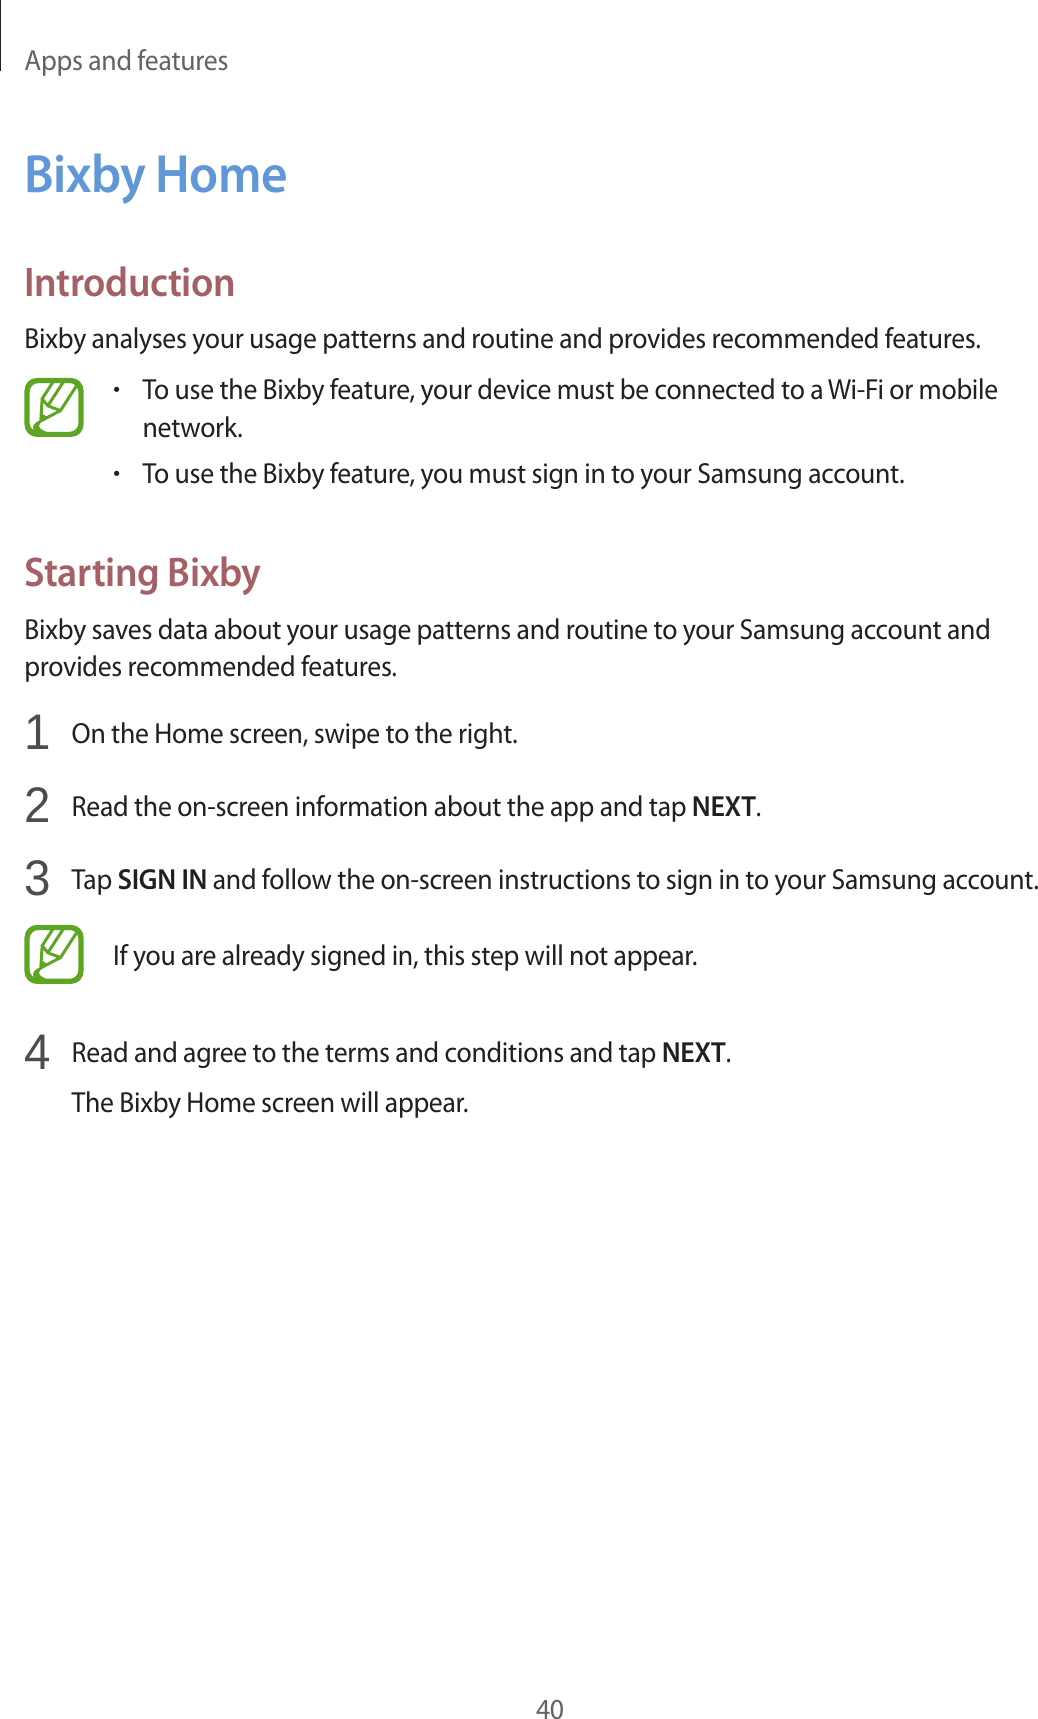 Apps and features40Bixby HomeIntroductionBixby analyses your usage patterns and routine and provides recommended features.•To use the Bixby feature, your device must be connected to a Wi-Fi or mobile network.•To use the Bixby feature, you must sign in to your Samsung account.Starting BixbyBixby saves data about your usage patterns and routine to your Samsung account and provides recommended features.1  On the Home screen, swipe to the right.2  Read the on-screen information about the app and tap NEXT.3  Tap SIGN IN and follow the on-screen instructions to sign in to your Samsung account.If you are already signed in, this step will not appear.4  Read and agree to the terms and conditions and tap NEXT.The Bixby Home screen will appear.